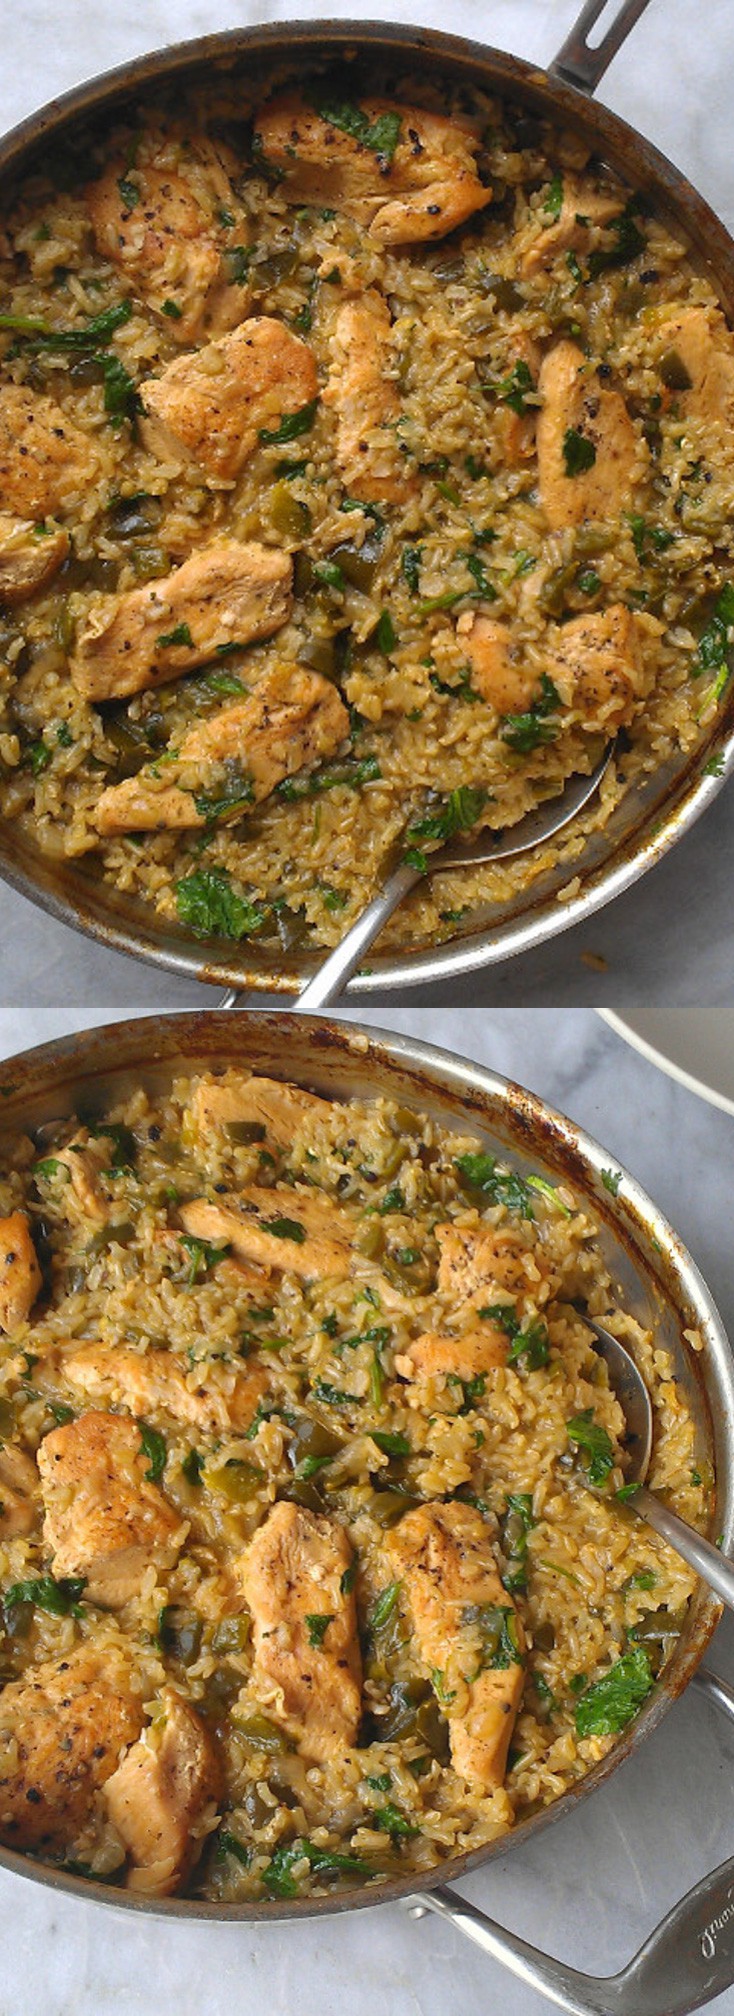 Skillet Chicken with Mexican Green Rice! An easy, flavorful weeknight dinner. (Gluten-Free)